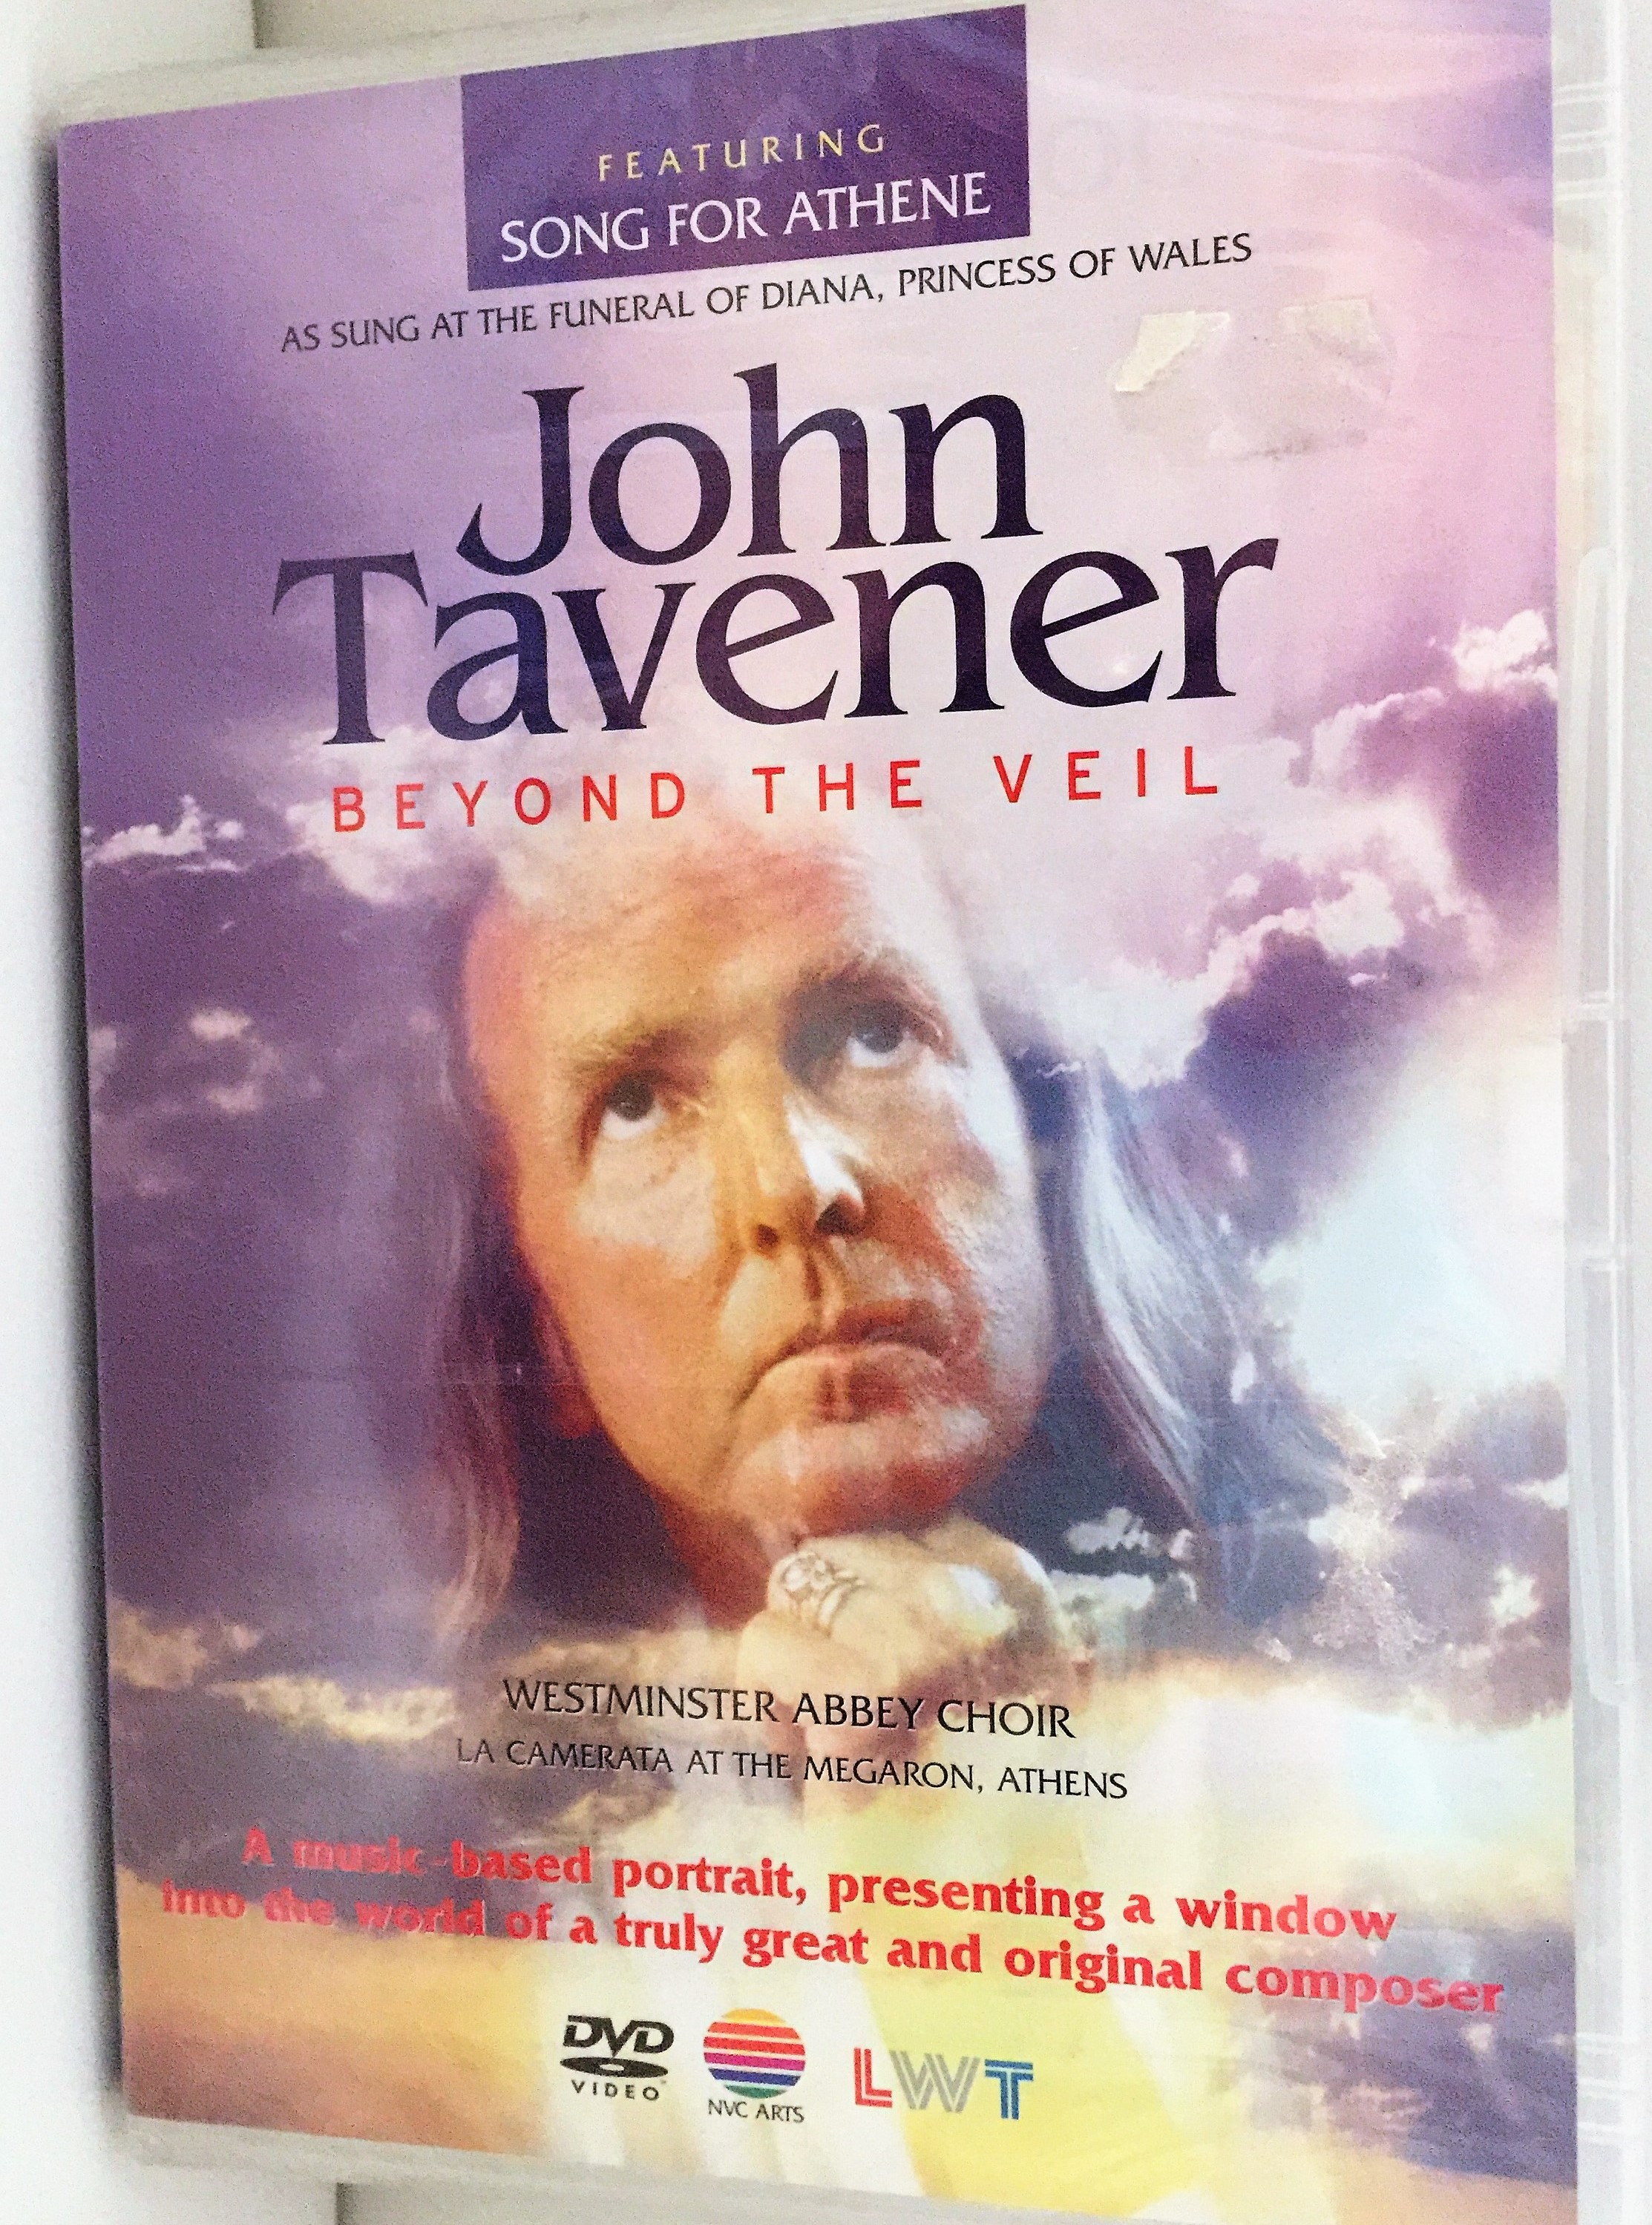 John Tavener - Beyond the Veil DVD 1998 Featuring Song for Athene 1